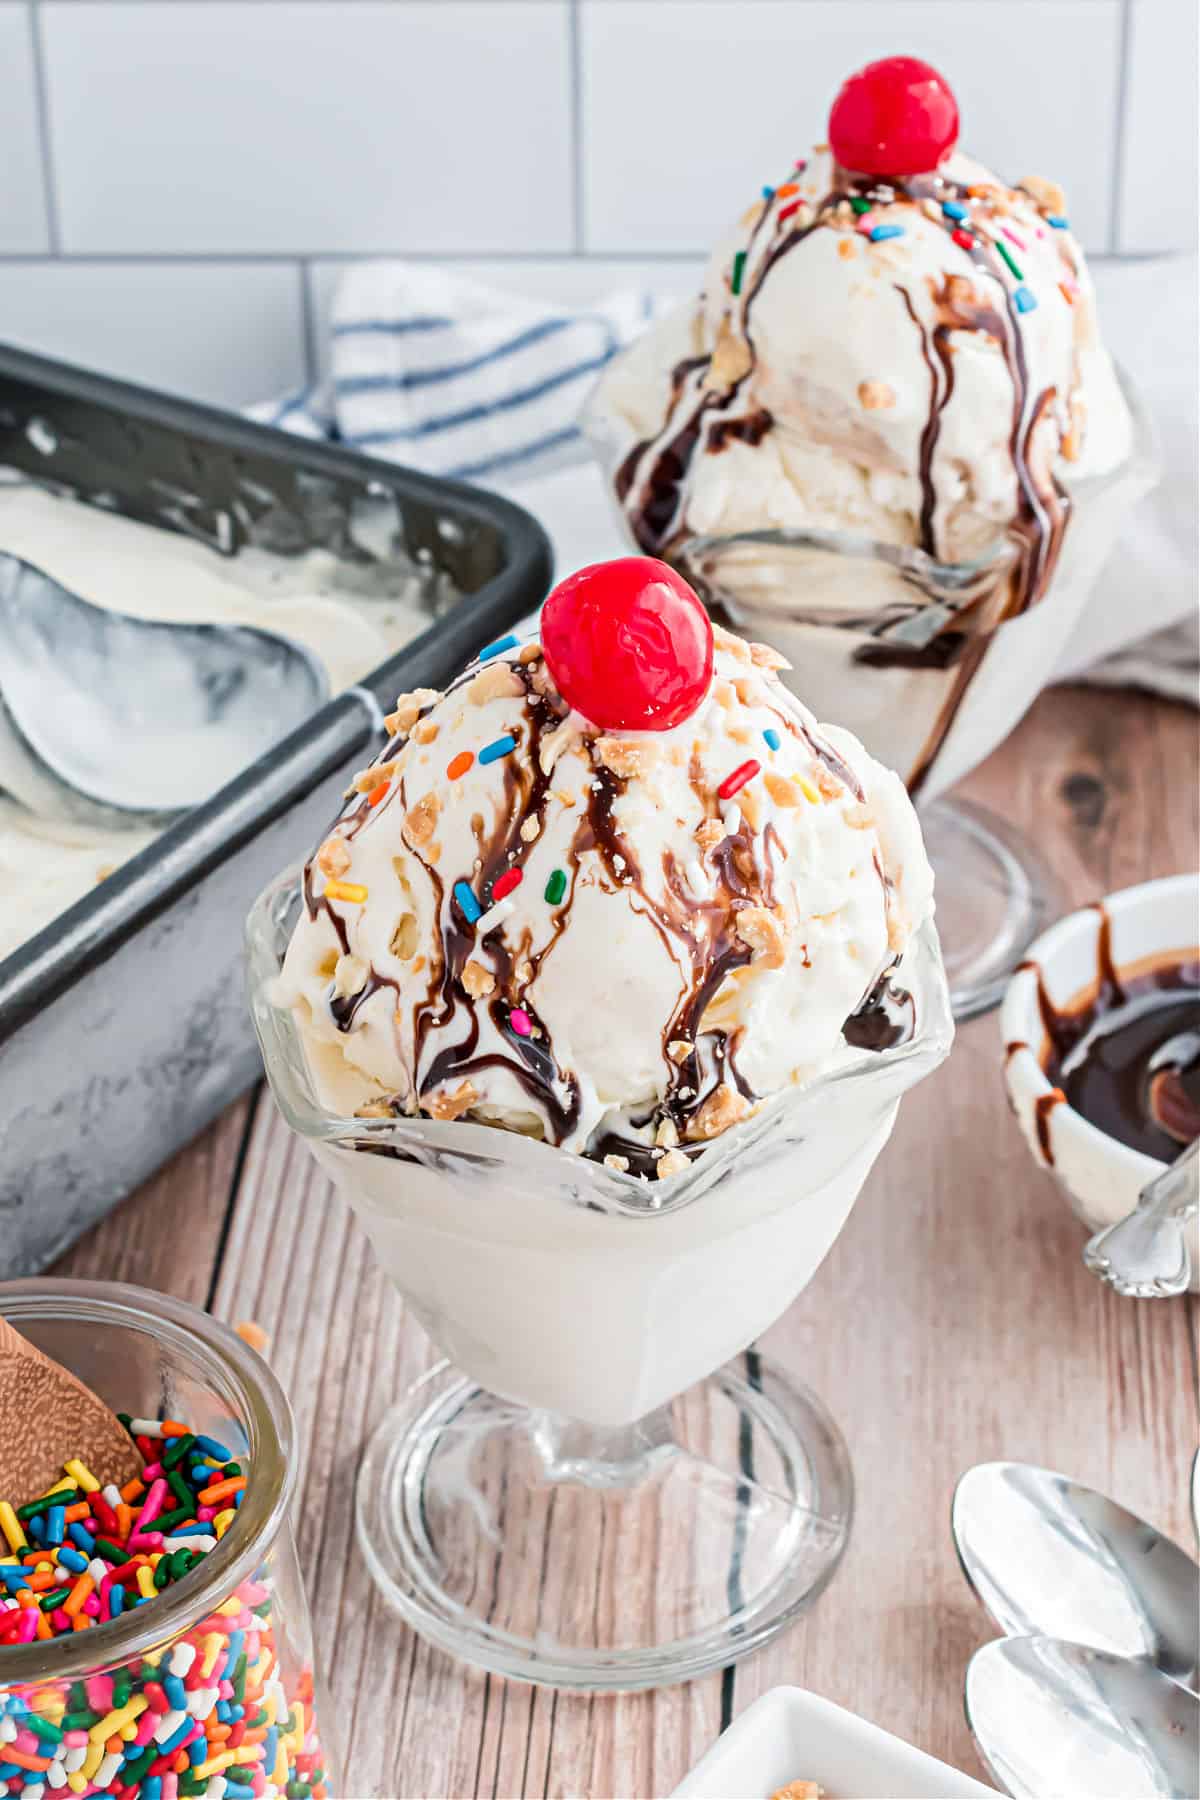 Dishes of vanilla ice cream with chocolate syrup, nuts, and cherry on top.